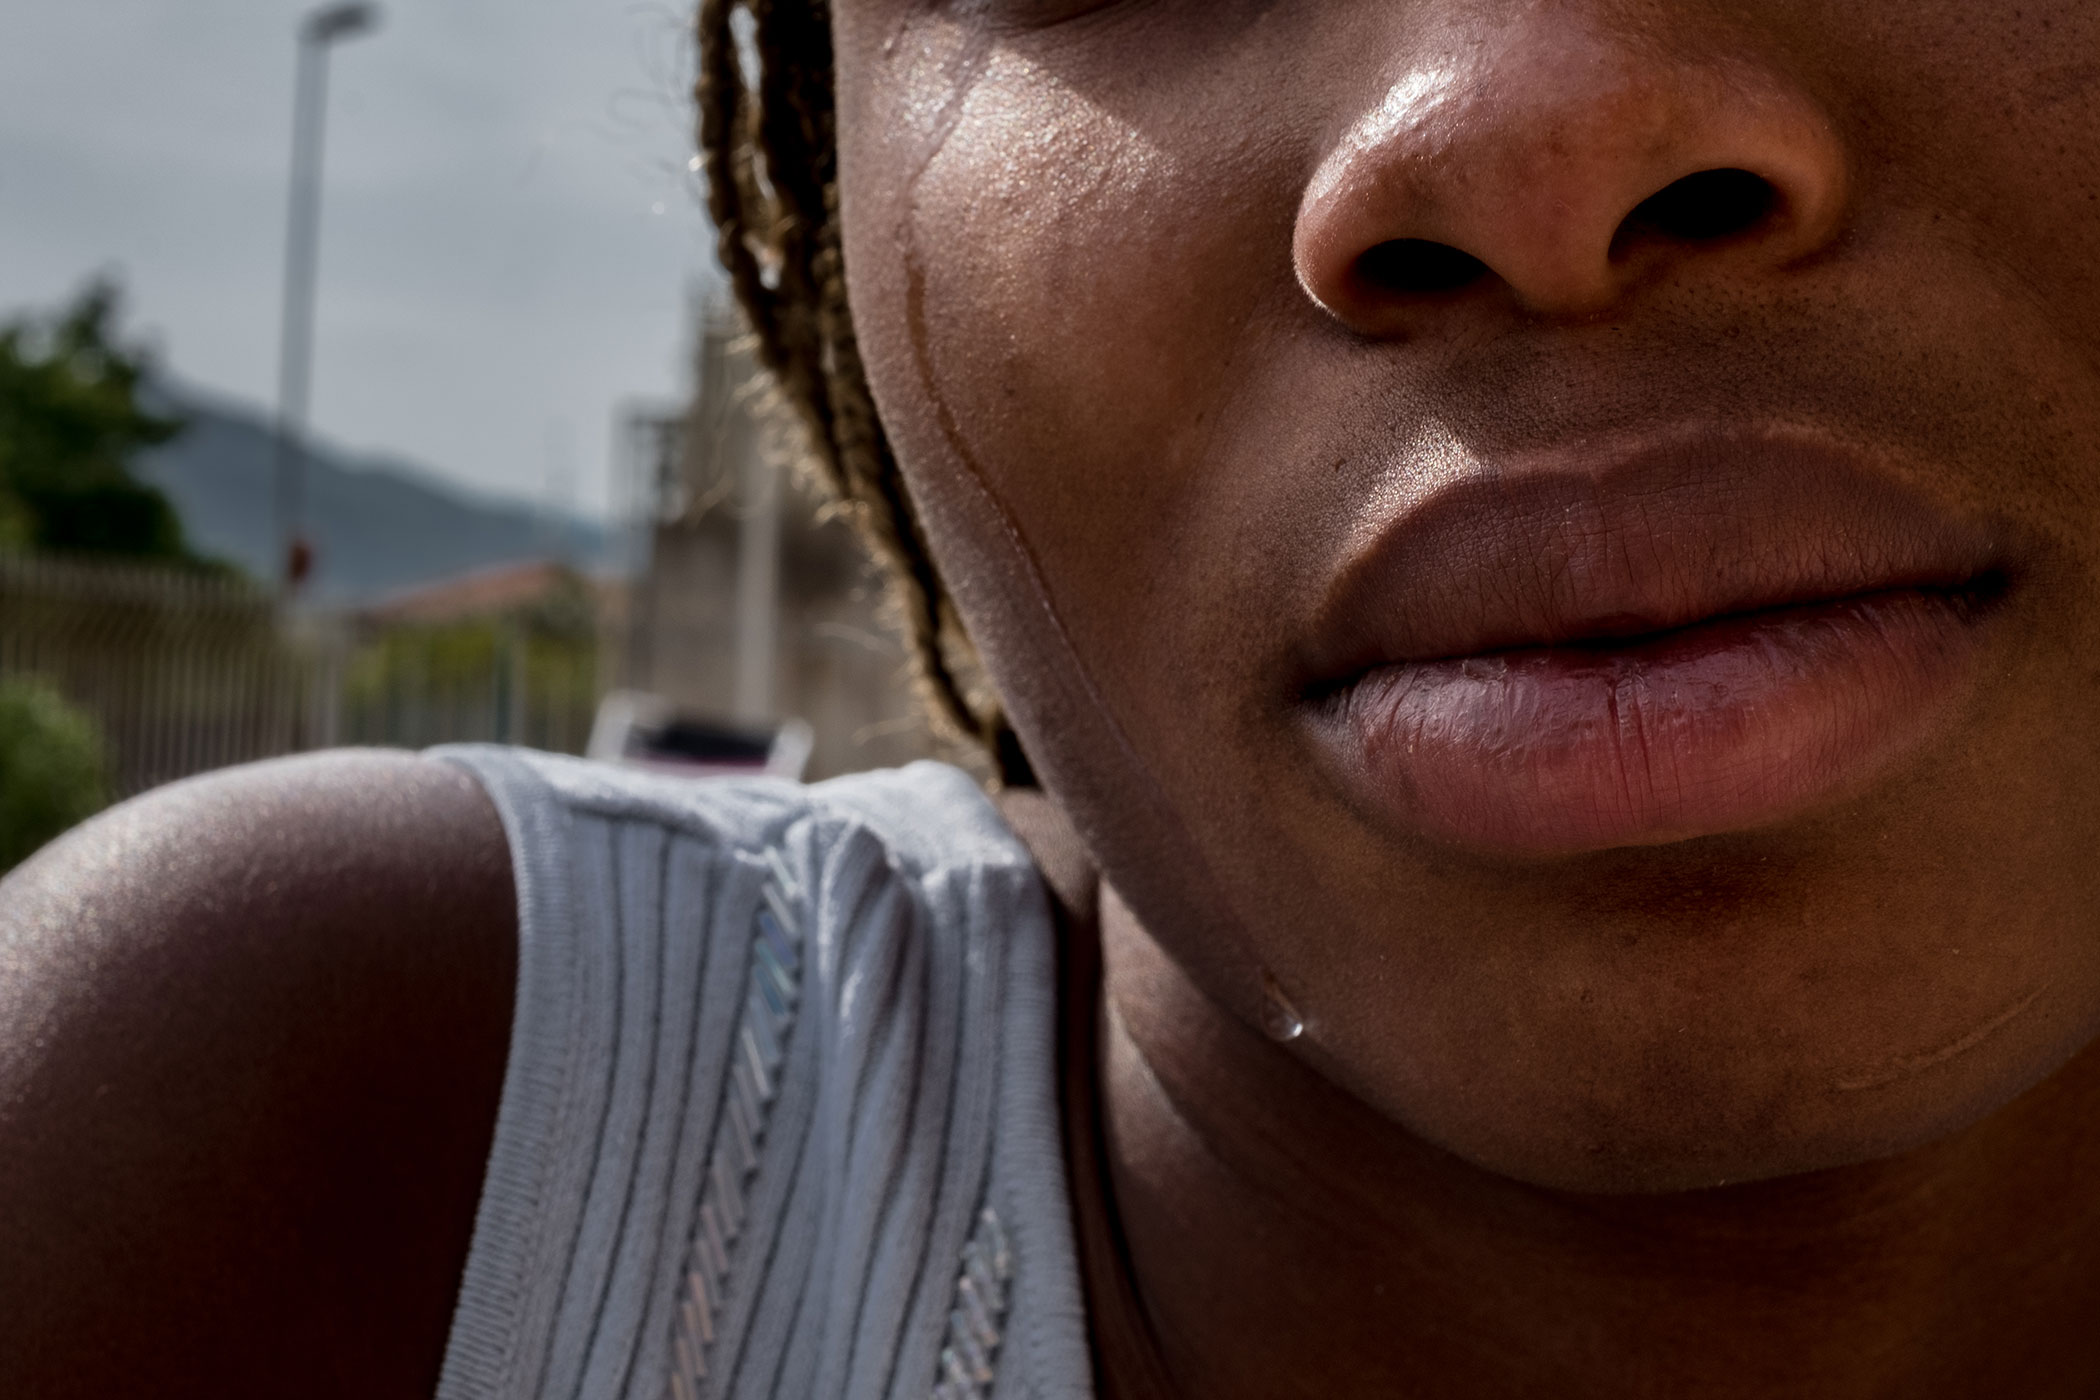 What I’m passing through right now is so big, so serious, I see myself as a grown-up,” says Mary*, a Nigerian teenager who was taken to Italy by sex traffickers. “I missed ever being a child.” © UNICEF/UN061189/Gilbertson VII Photo.